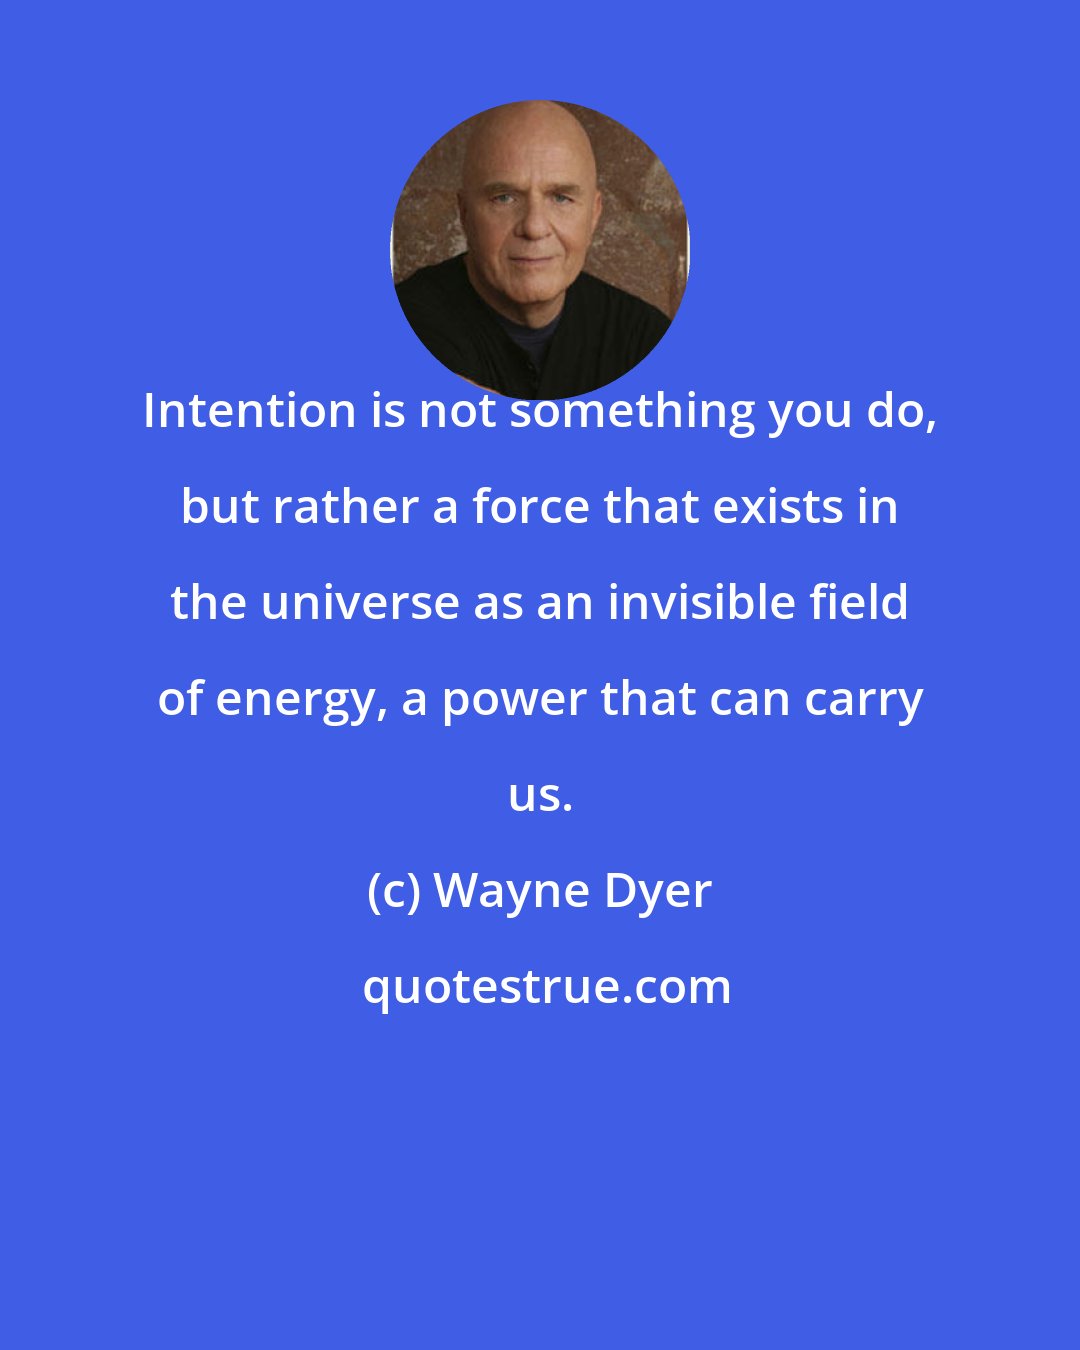 Wayne Dyer: Intention is not something you do, but rather a force that exists in the universe as an invisible field of energy, a power that can carry us.